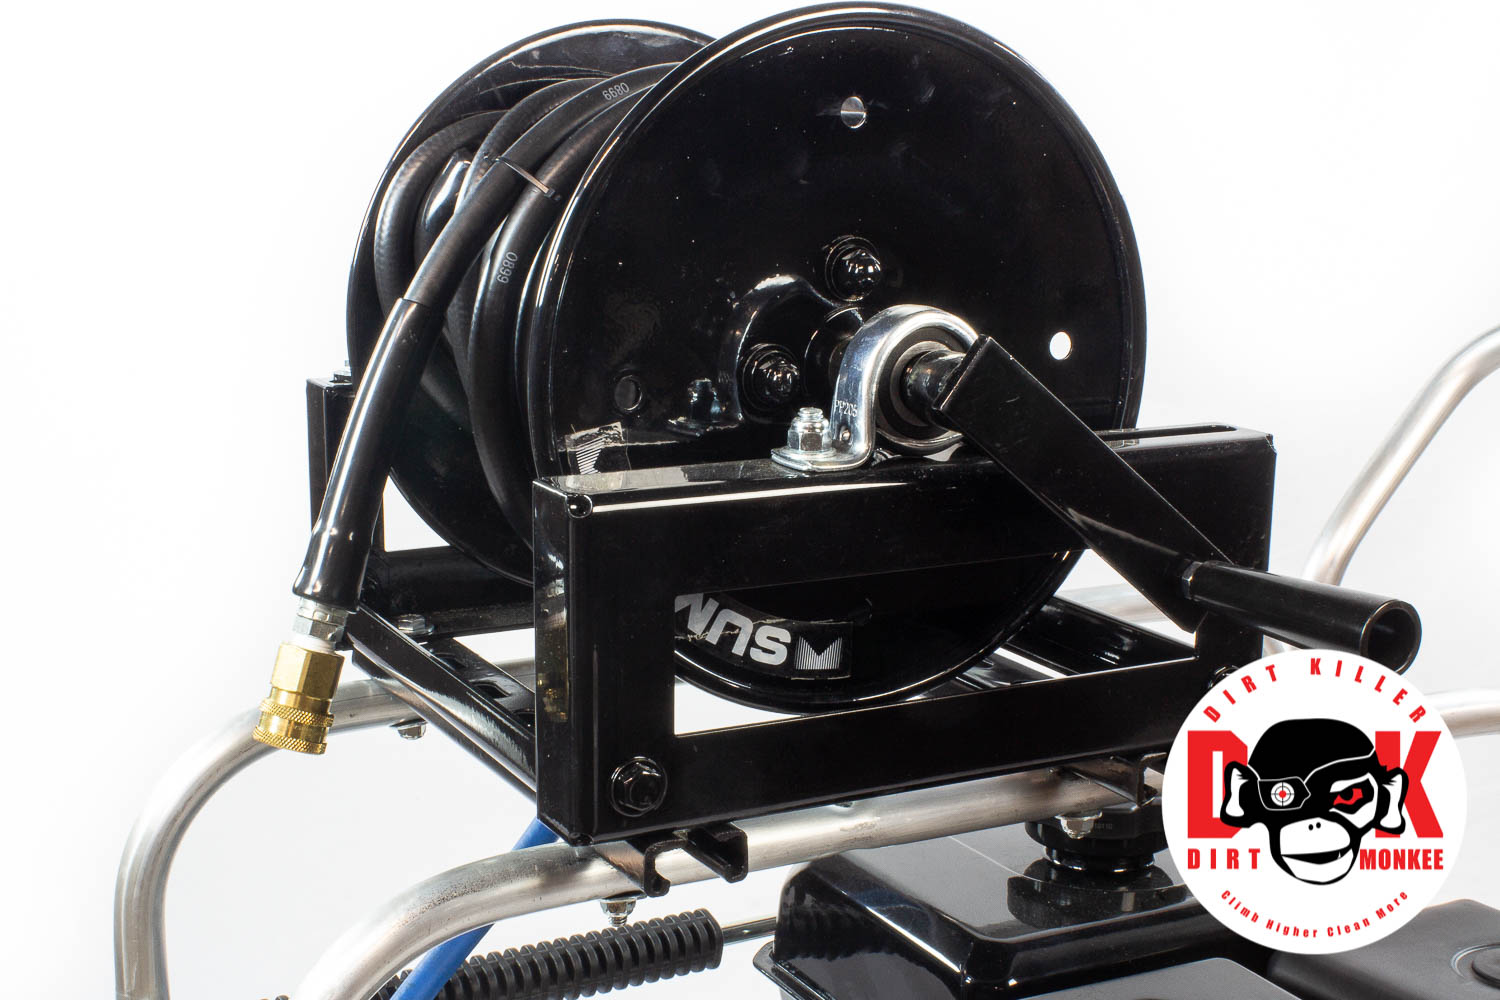 Dirt Monkee 15hp Power Ease General ESN pump 5.3 gpm 3000 psi rollover frame hose reel-image_2.3 gpm 3000 psi rollover frame hose reel-image_2